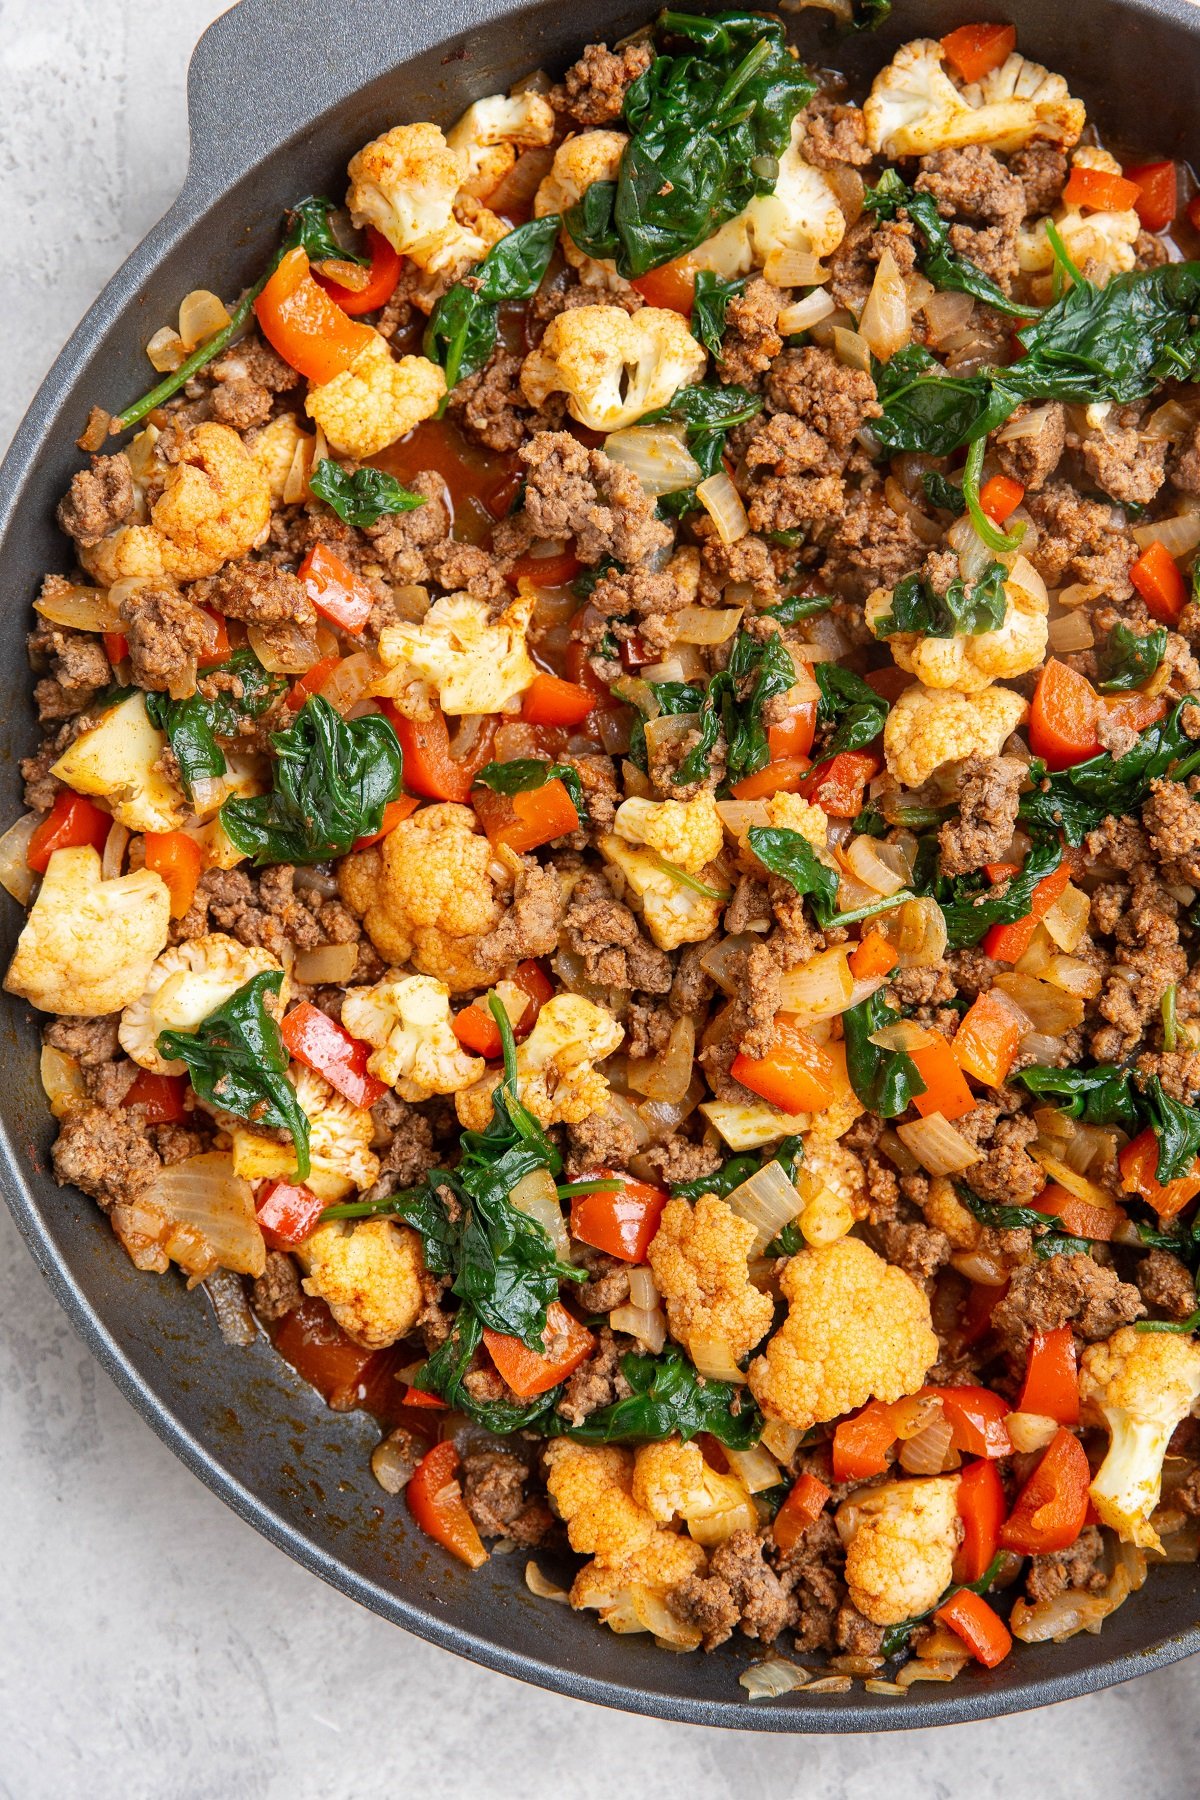 Ground beef and vegetables in a skillet, ready to serve.